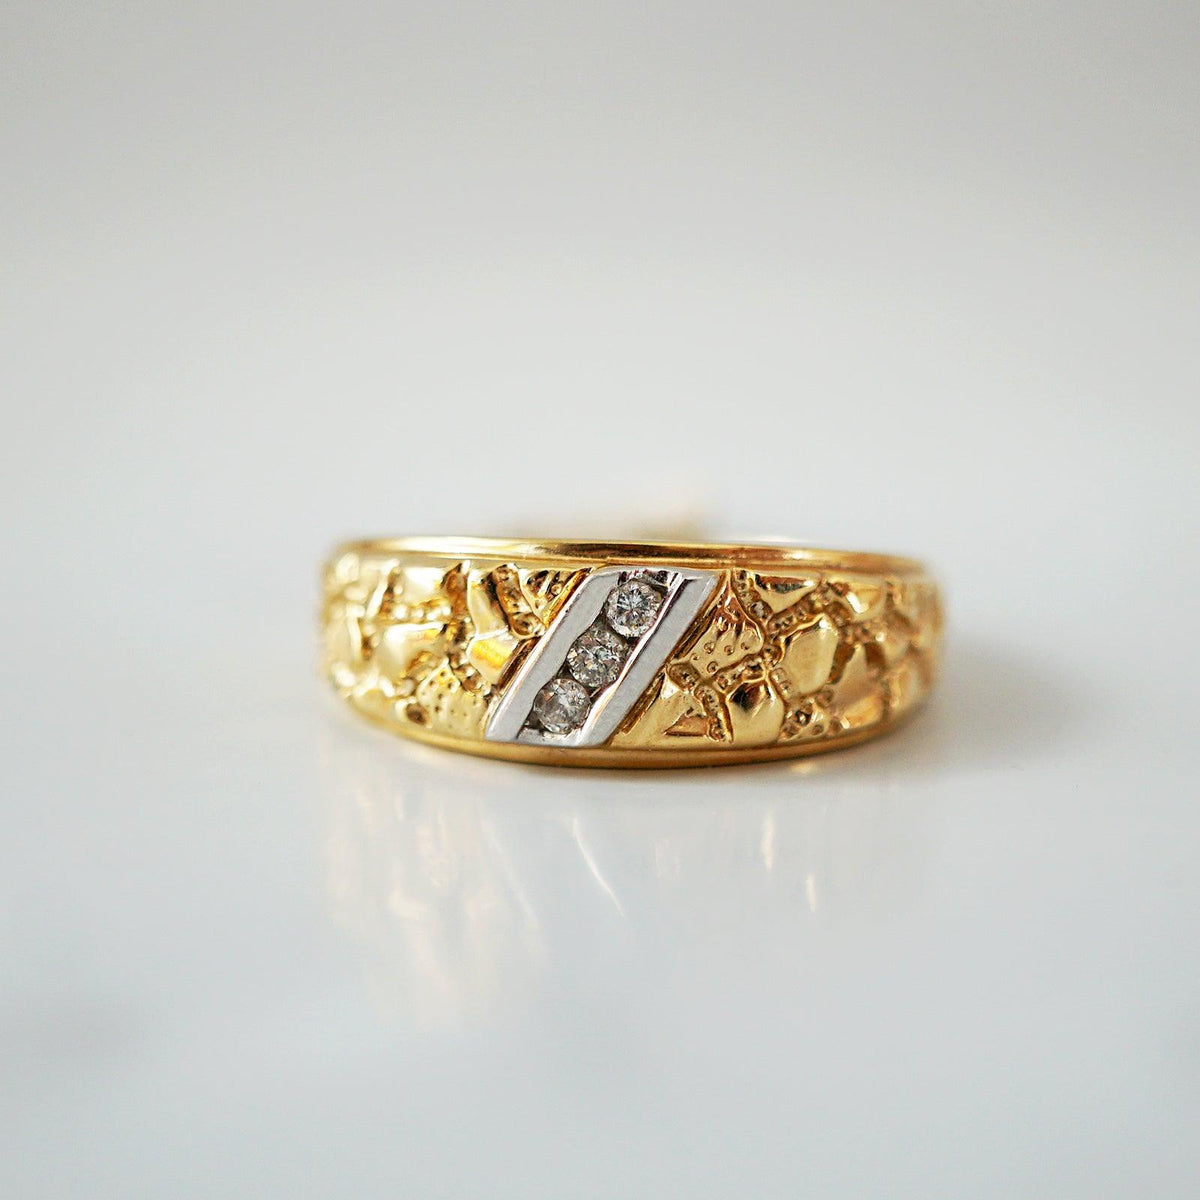 One Of A Kind: 14K Lava Diamond Ring